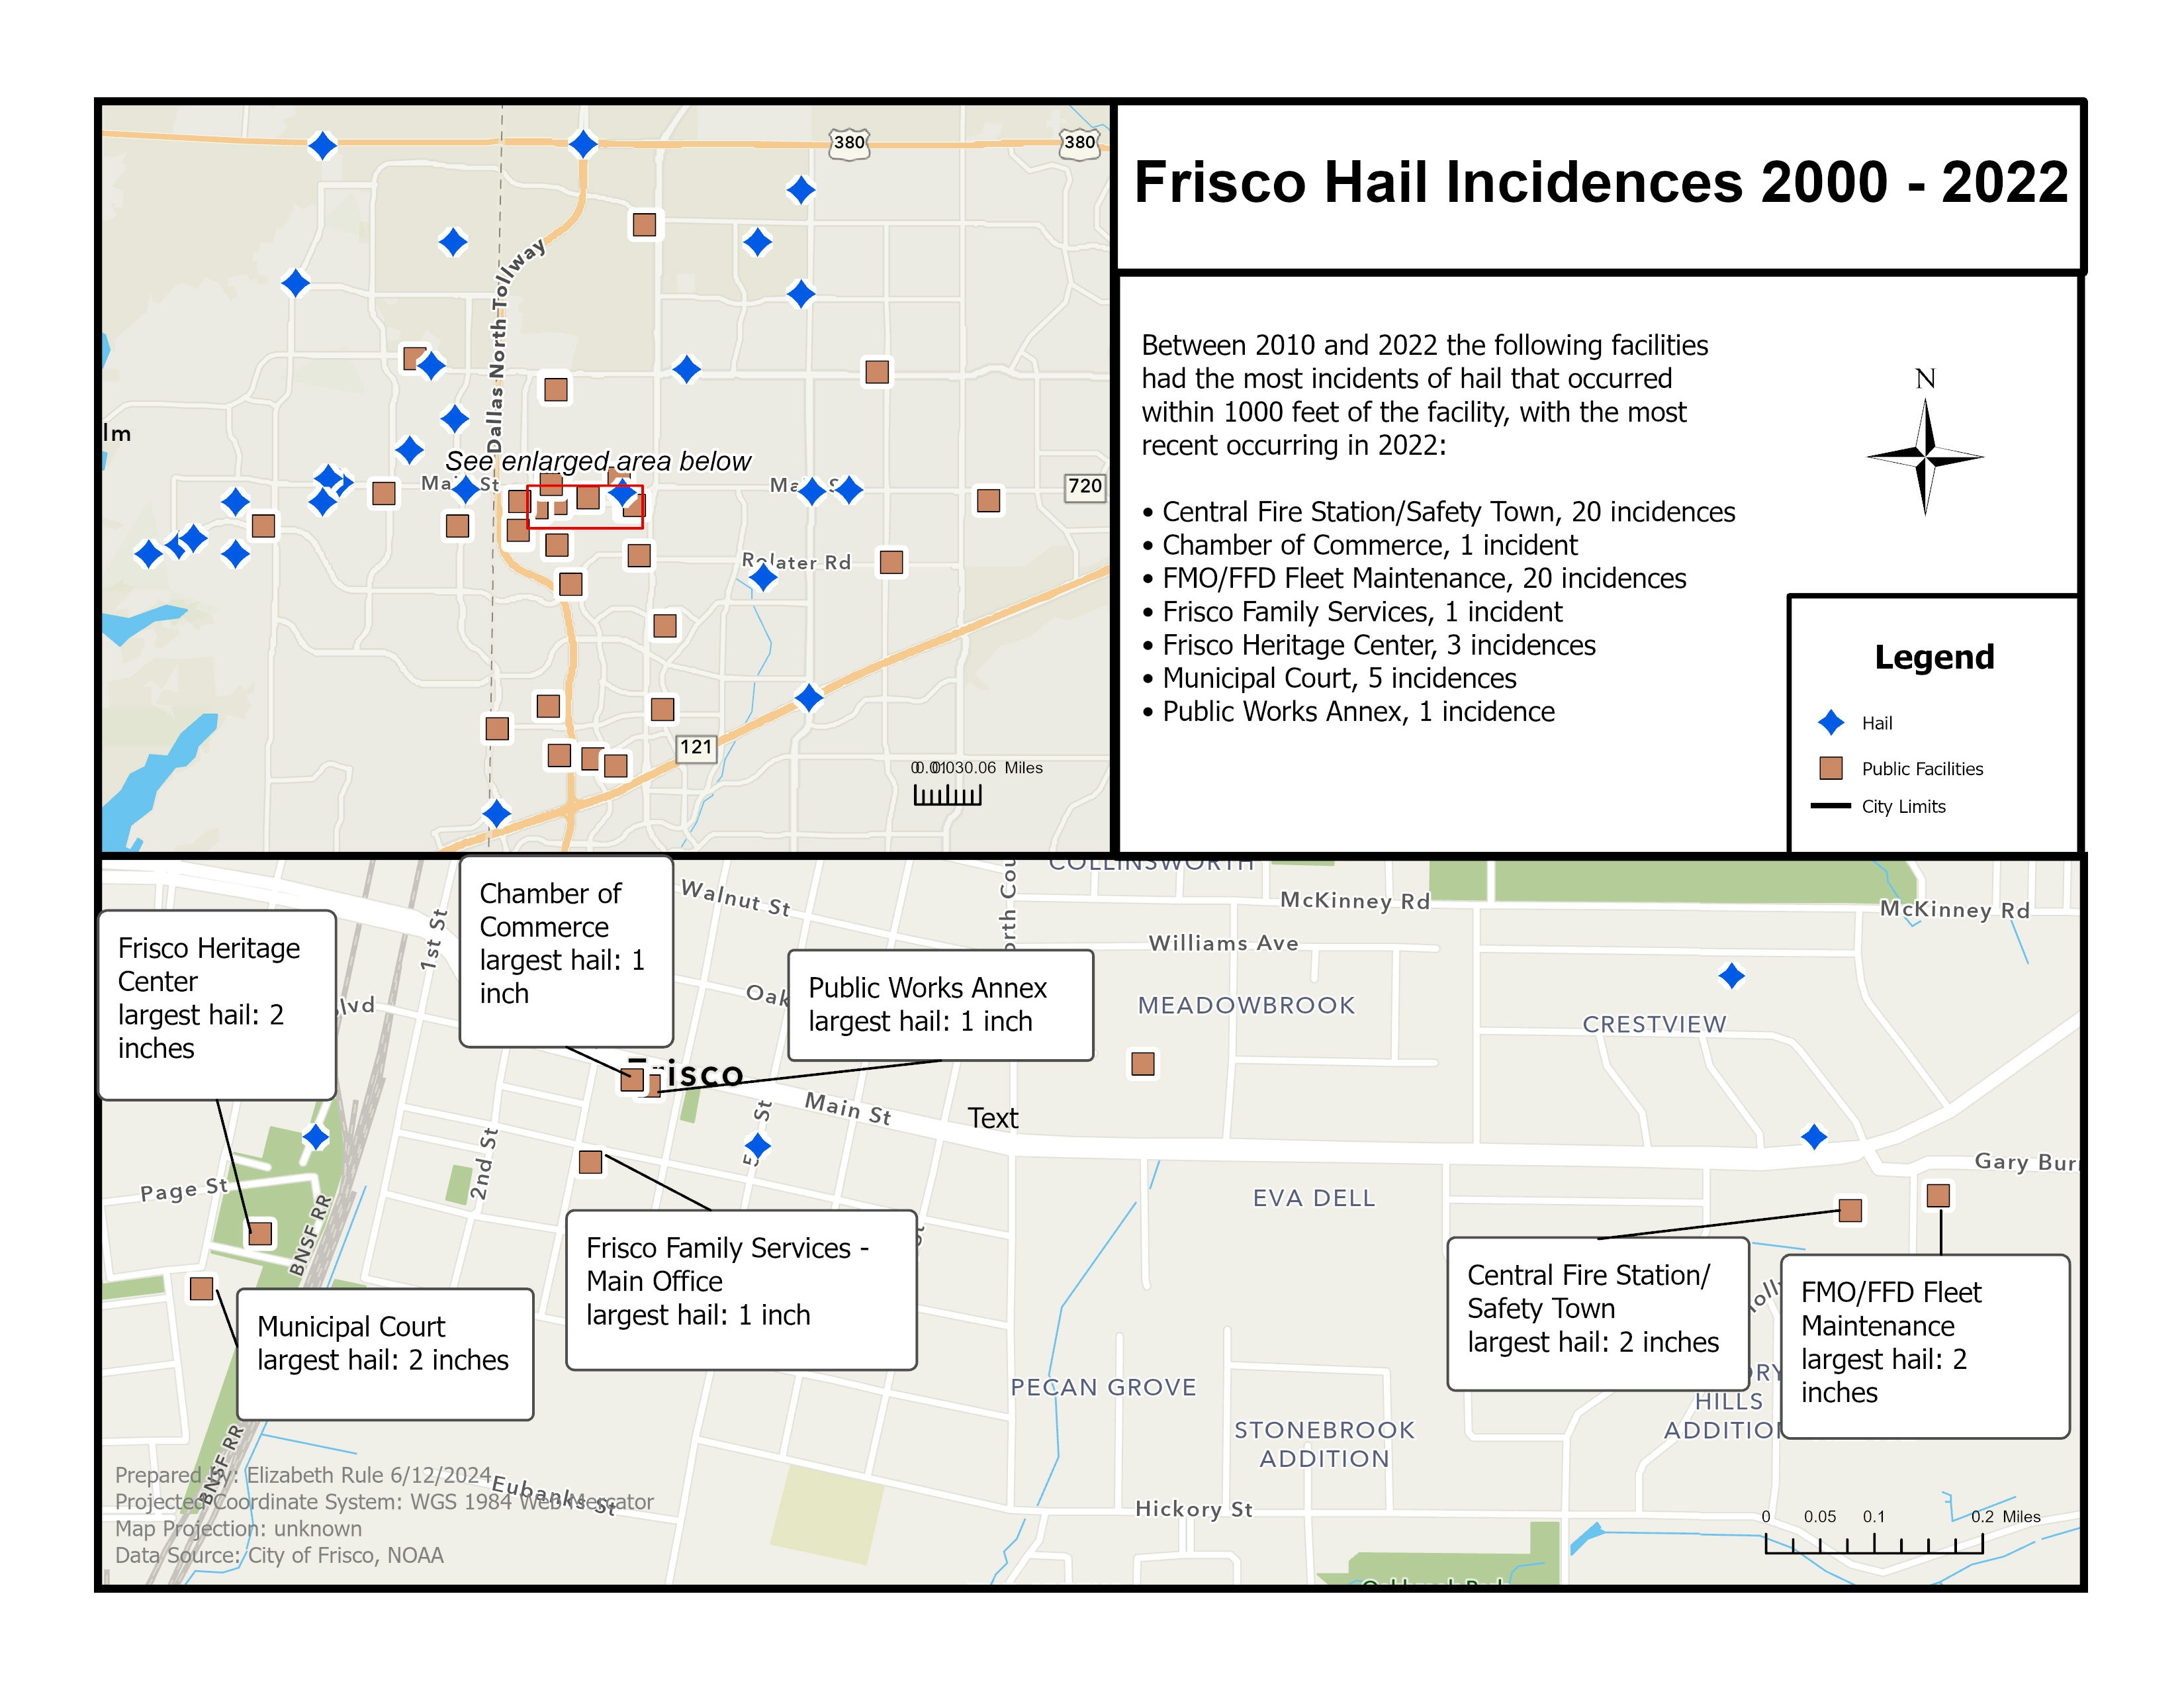 Incidence of Hail in Frisco, Texas